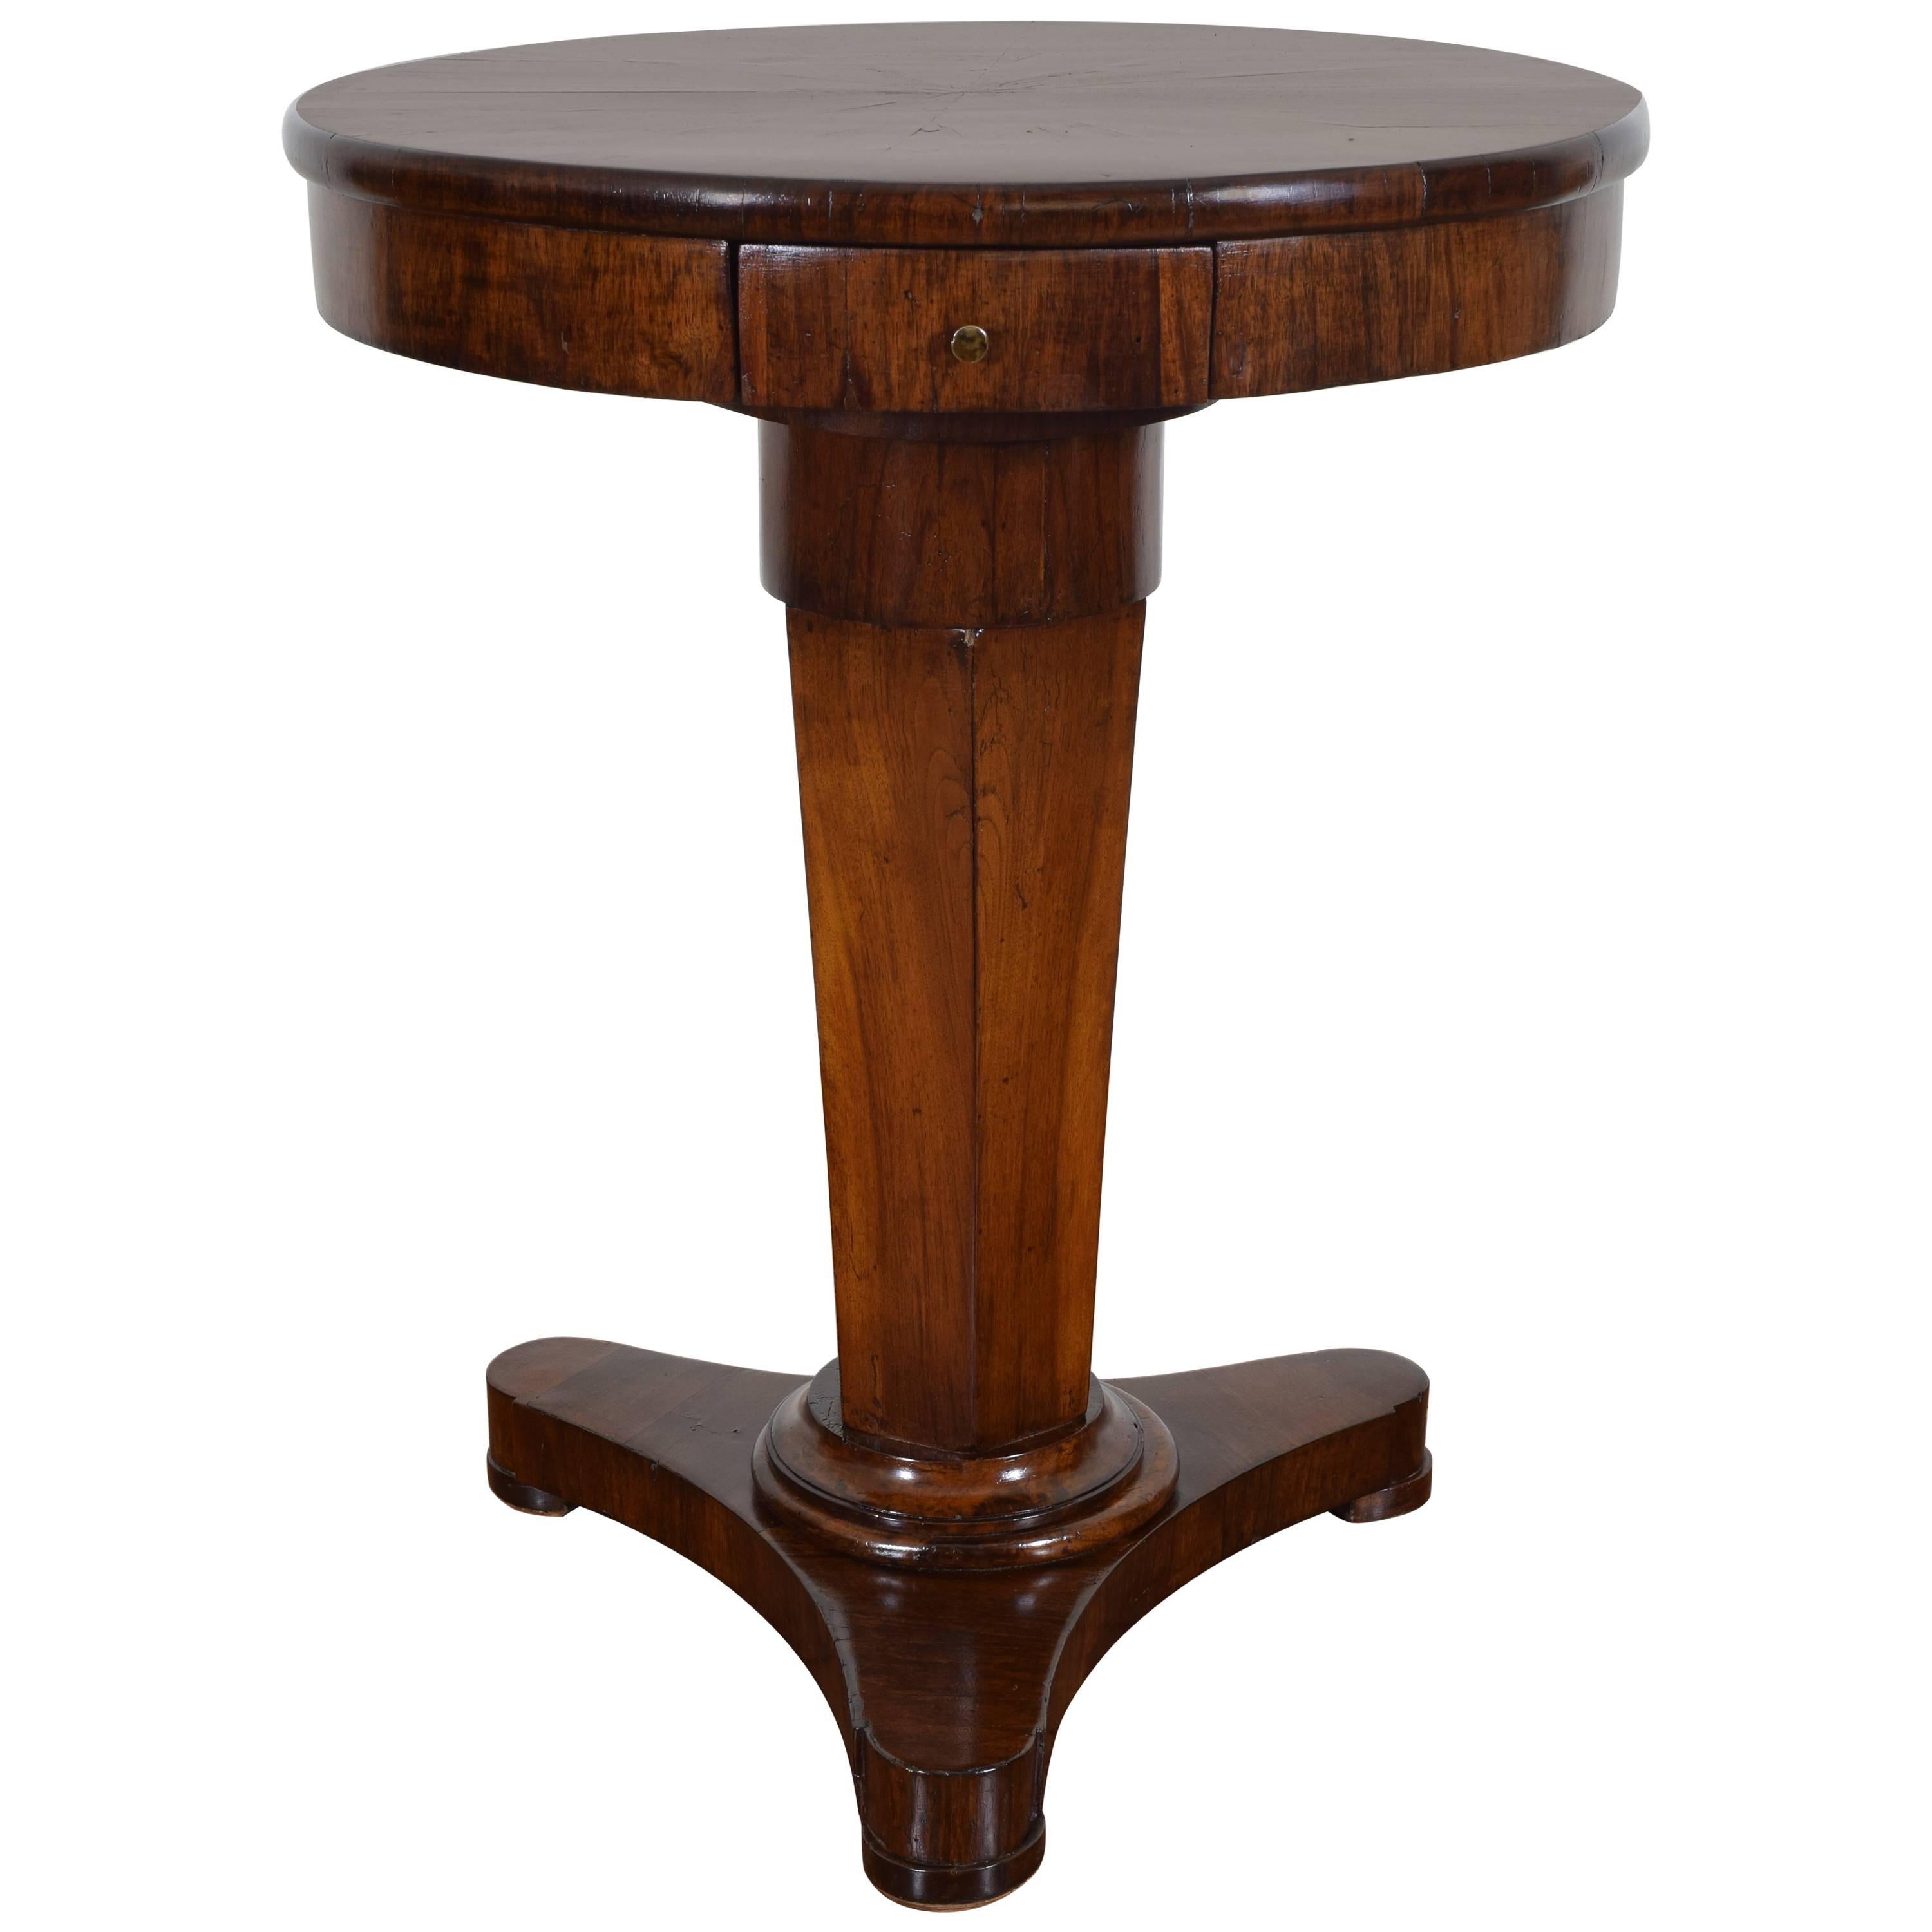 Italian Late Neoclassical Period Mahogany One-Drawer Center Table, 19th Century